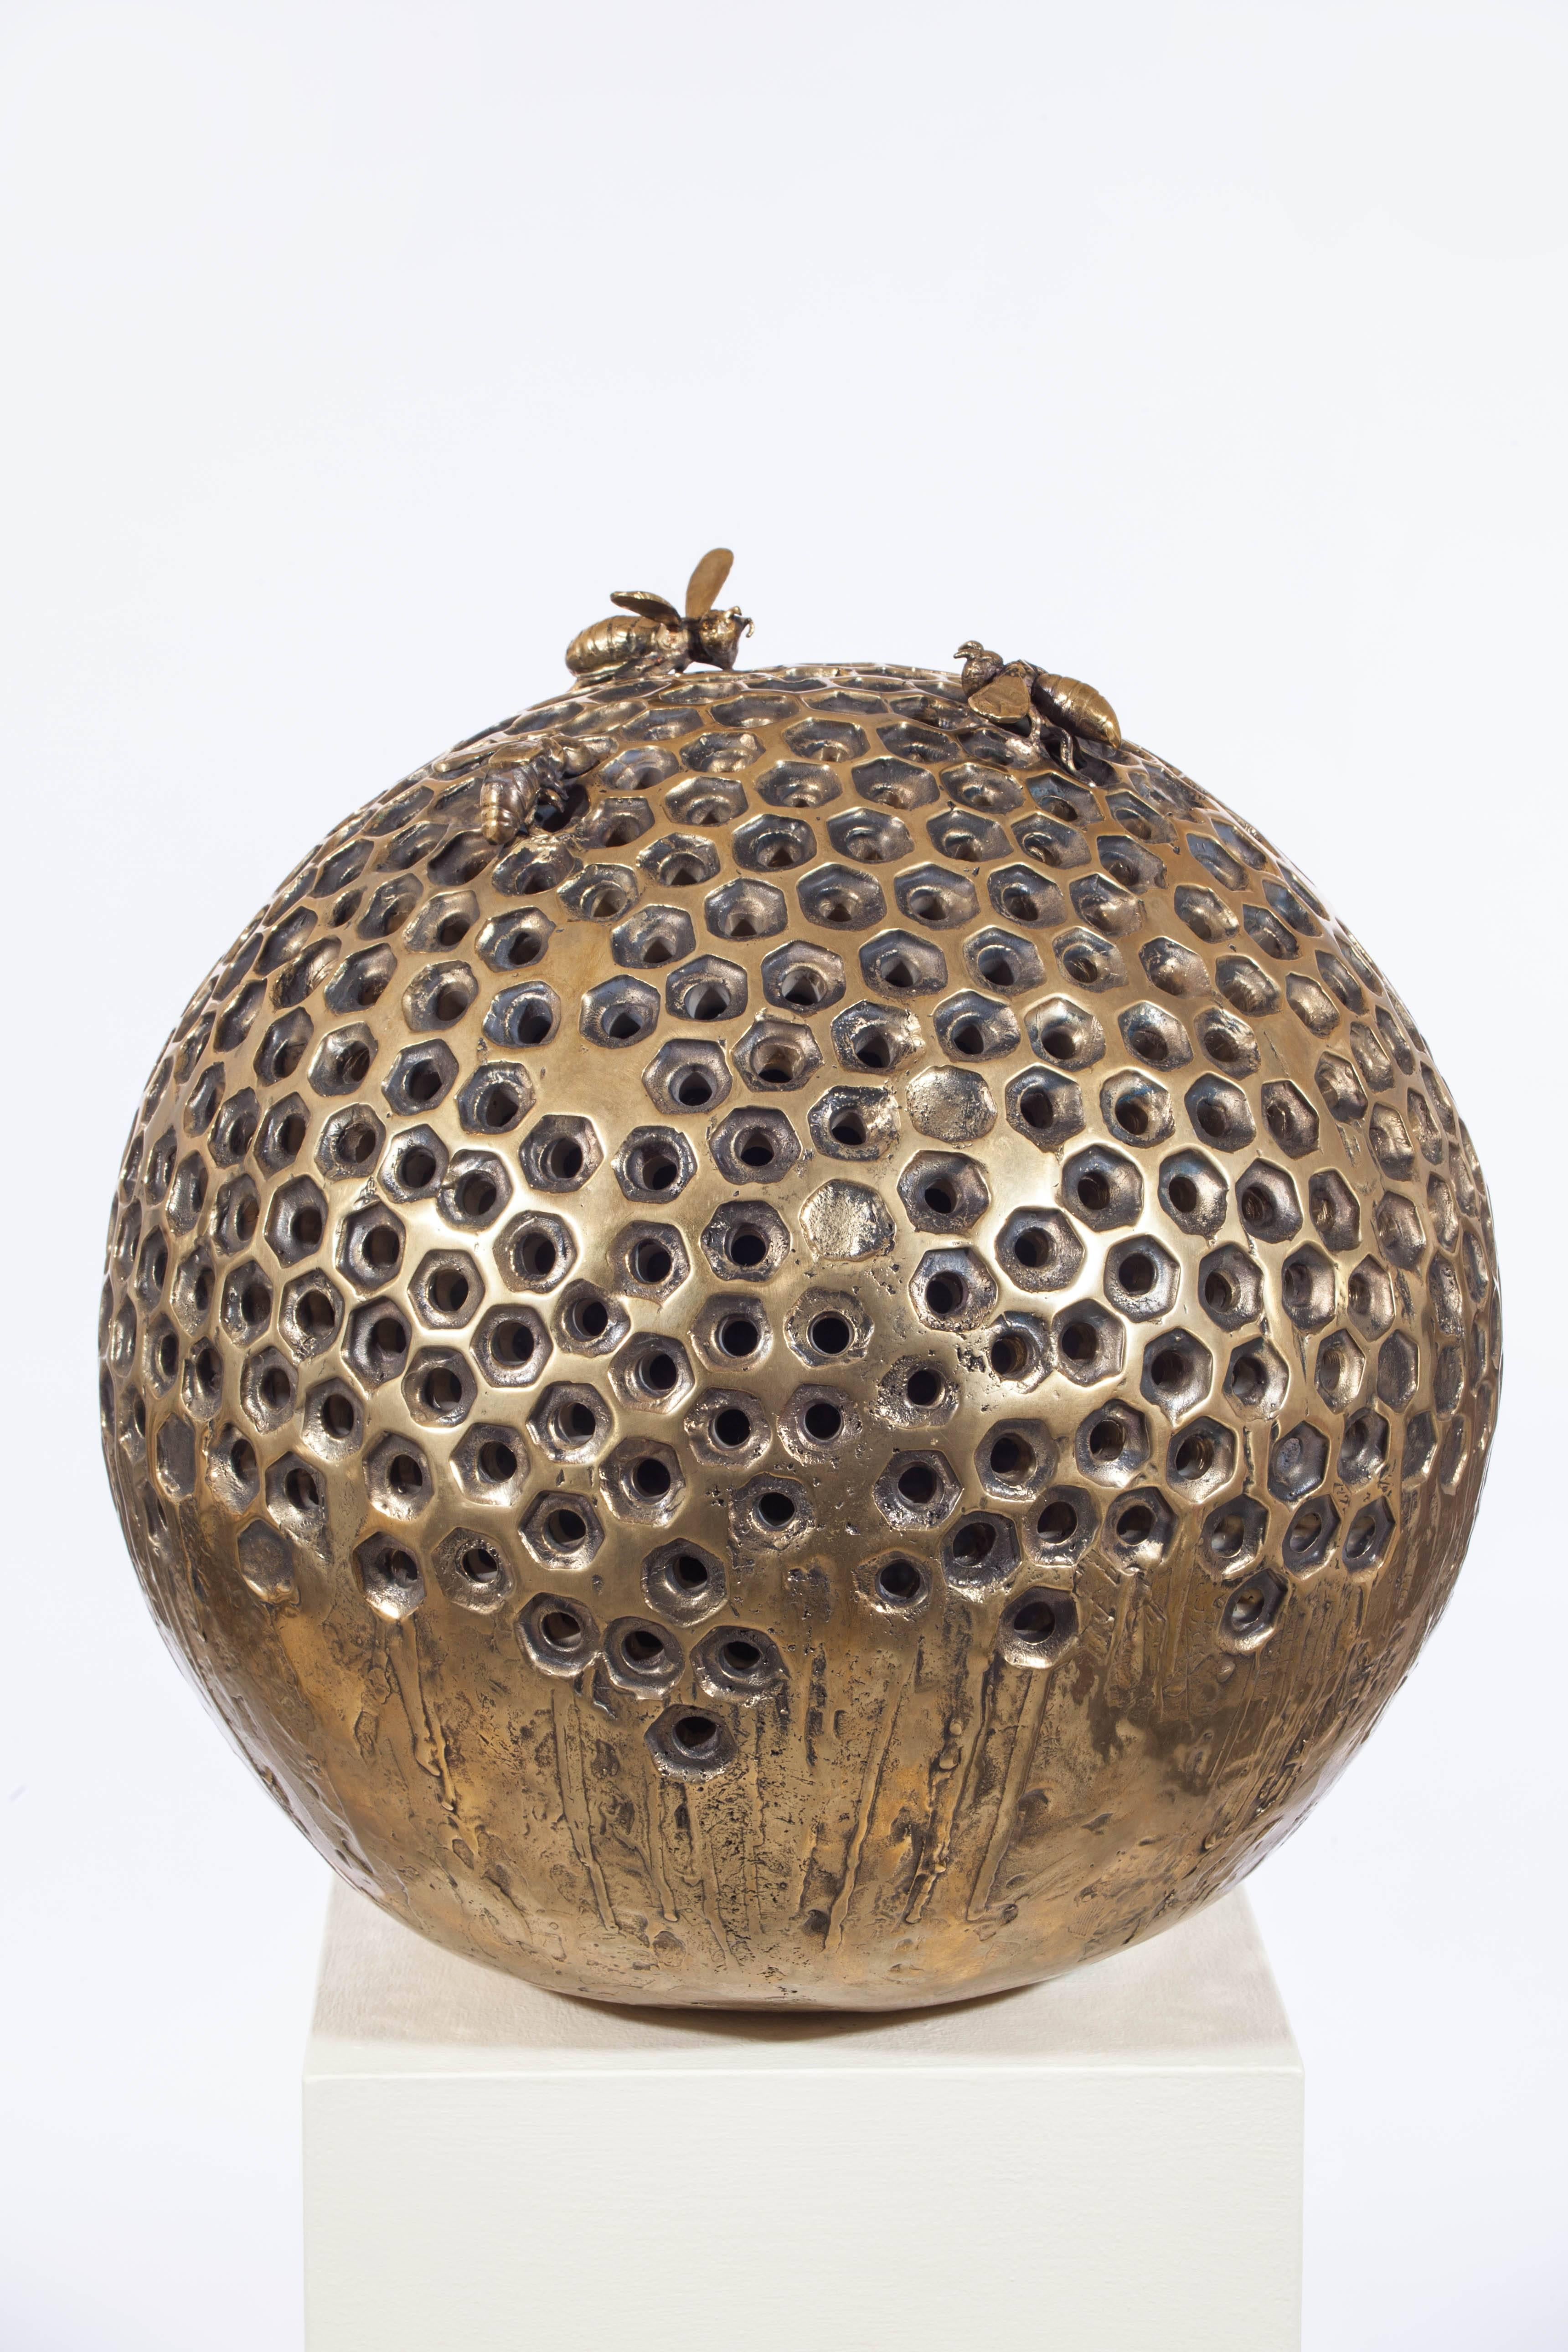 Honeycomb with bees 2000 by Jessica Carrol. Contemporary sculpture in bronze - Sculpture by Unknown